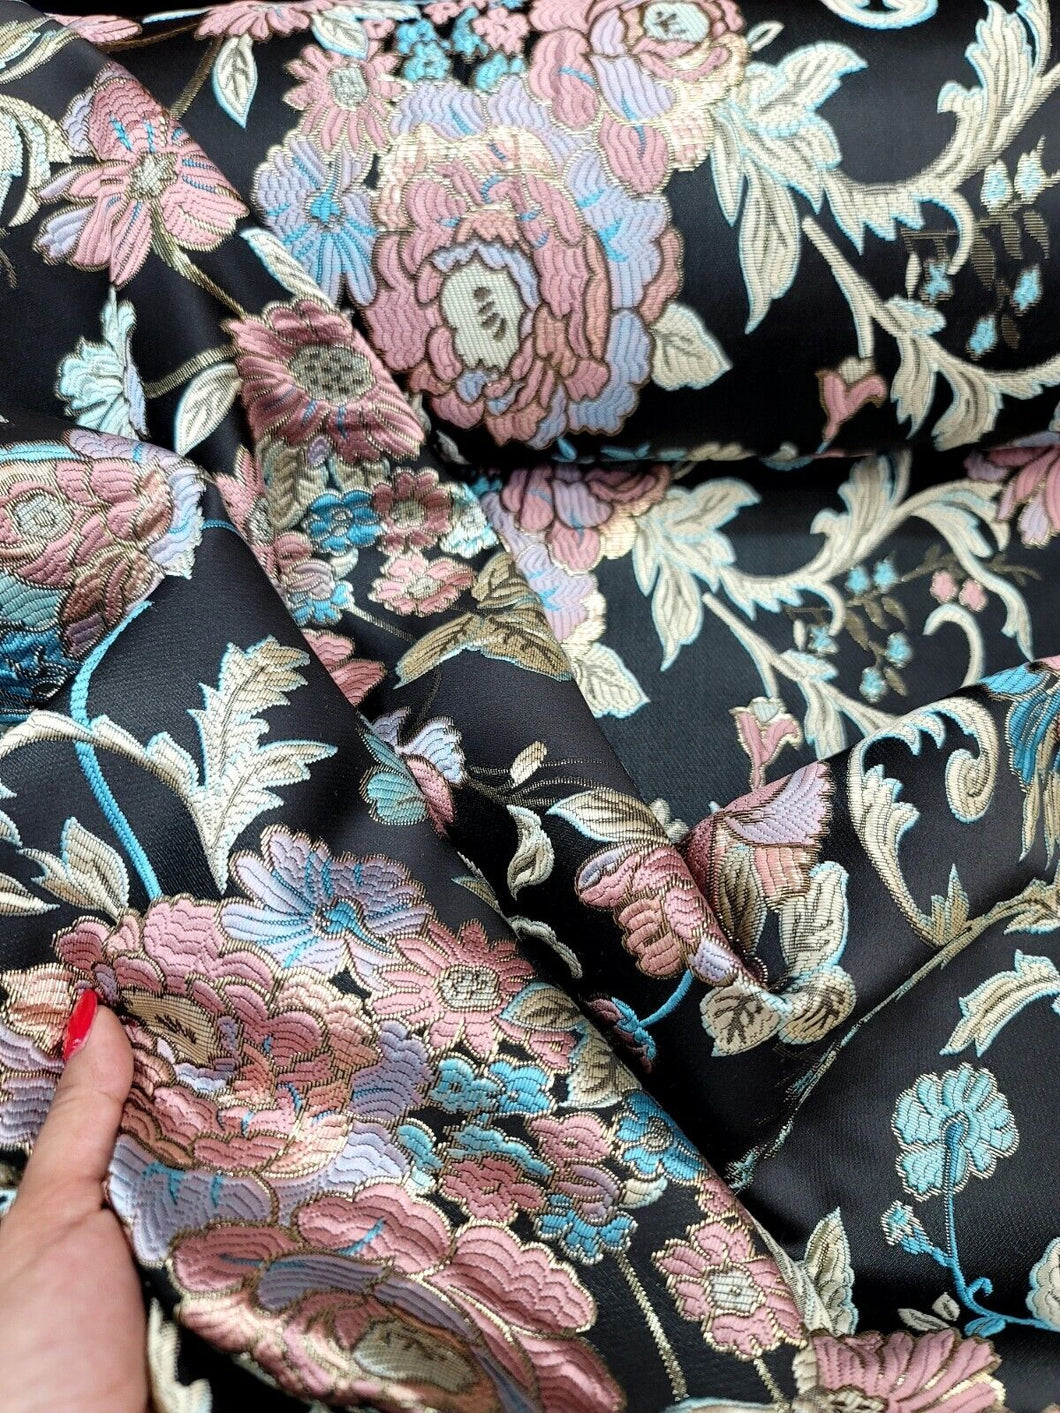 Fabric Sold By The Yard Brocade Lavender Floral Blue And Pink On Black Jacquard